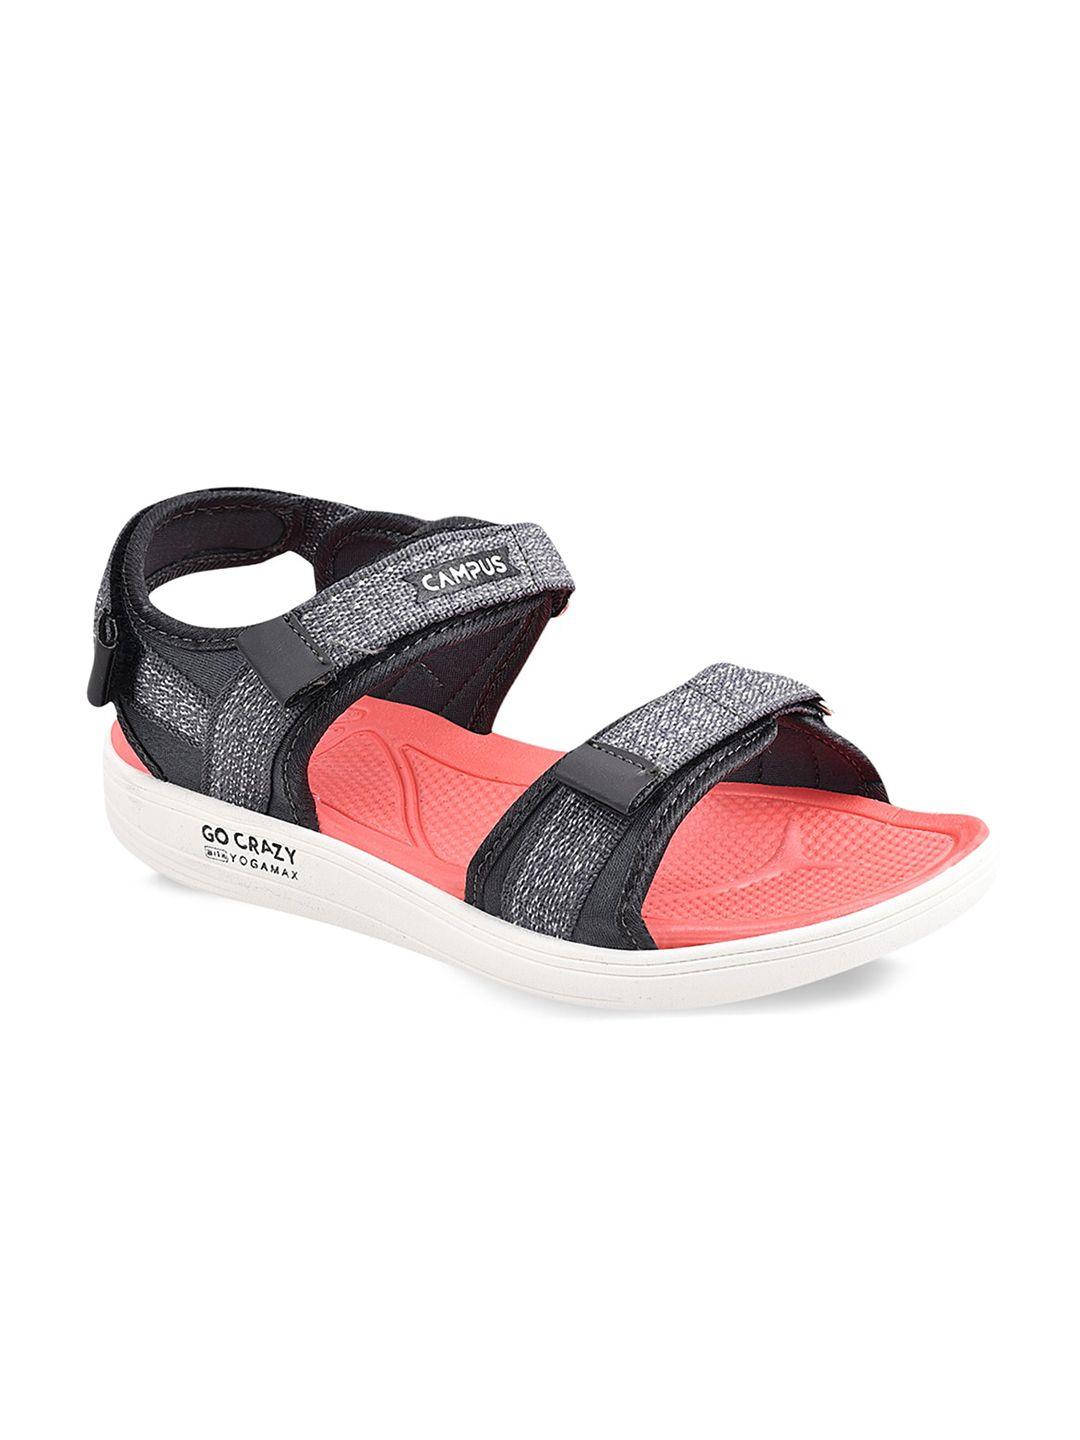 campus women grey & peach patterned sports sandals